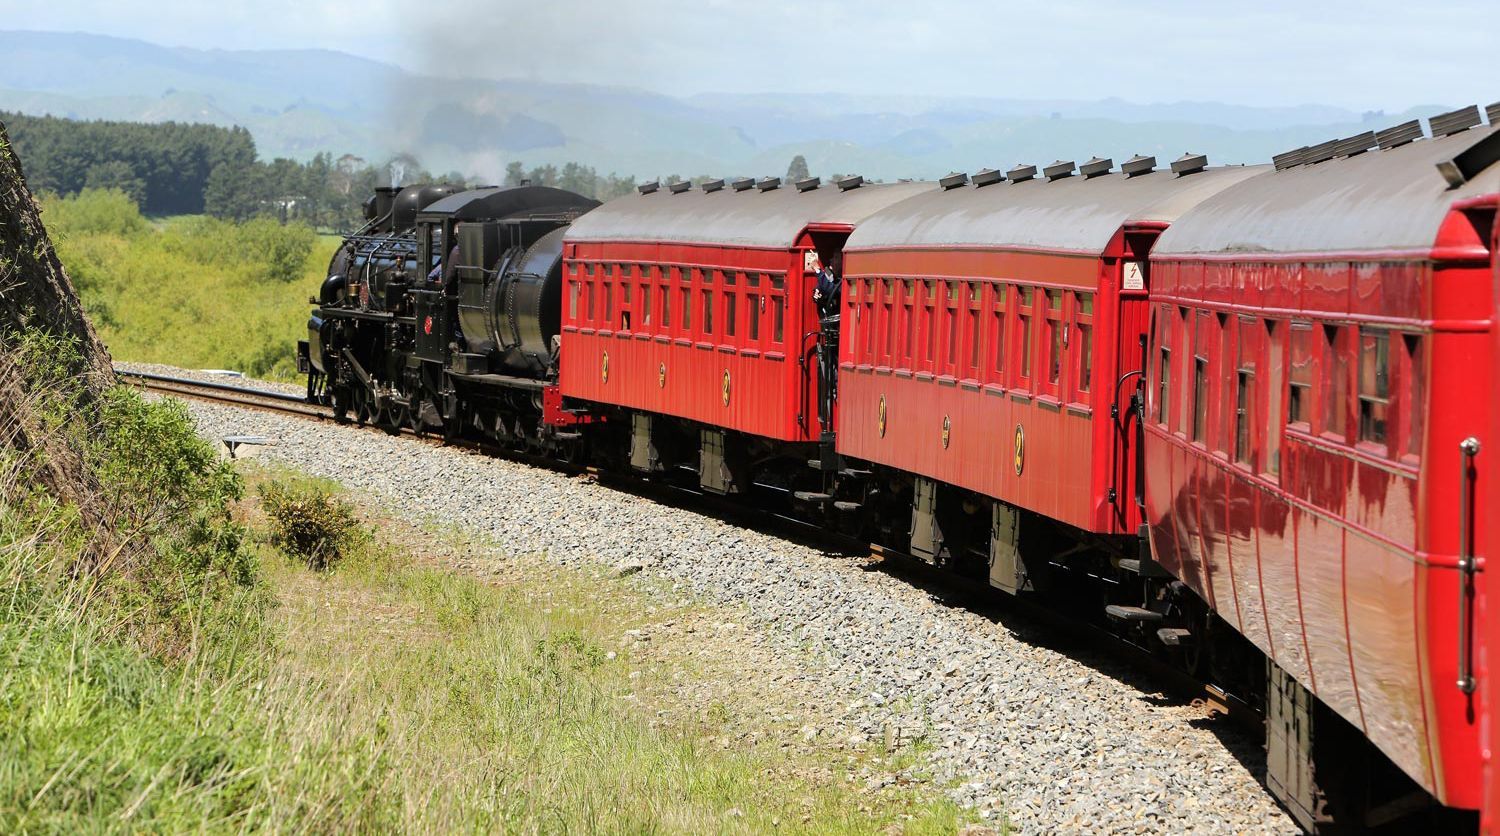 The Whale Train Heritage Steam Train experience that Journeys form Marlborough through Kaikoura to Christchurch in New Zealand.